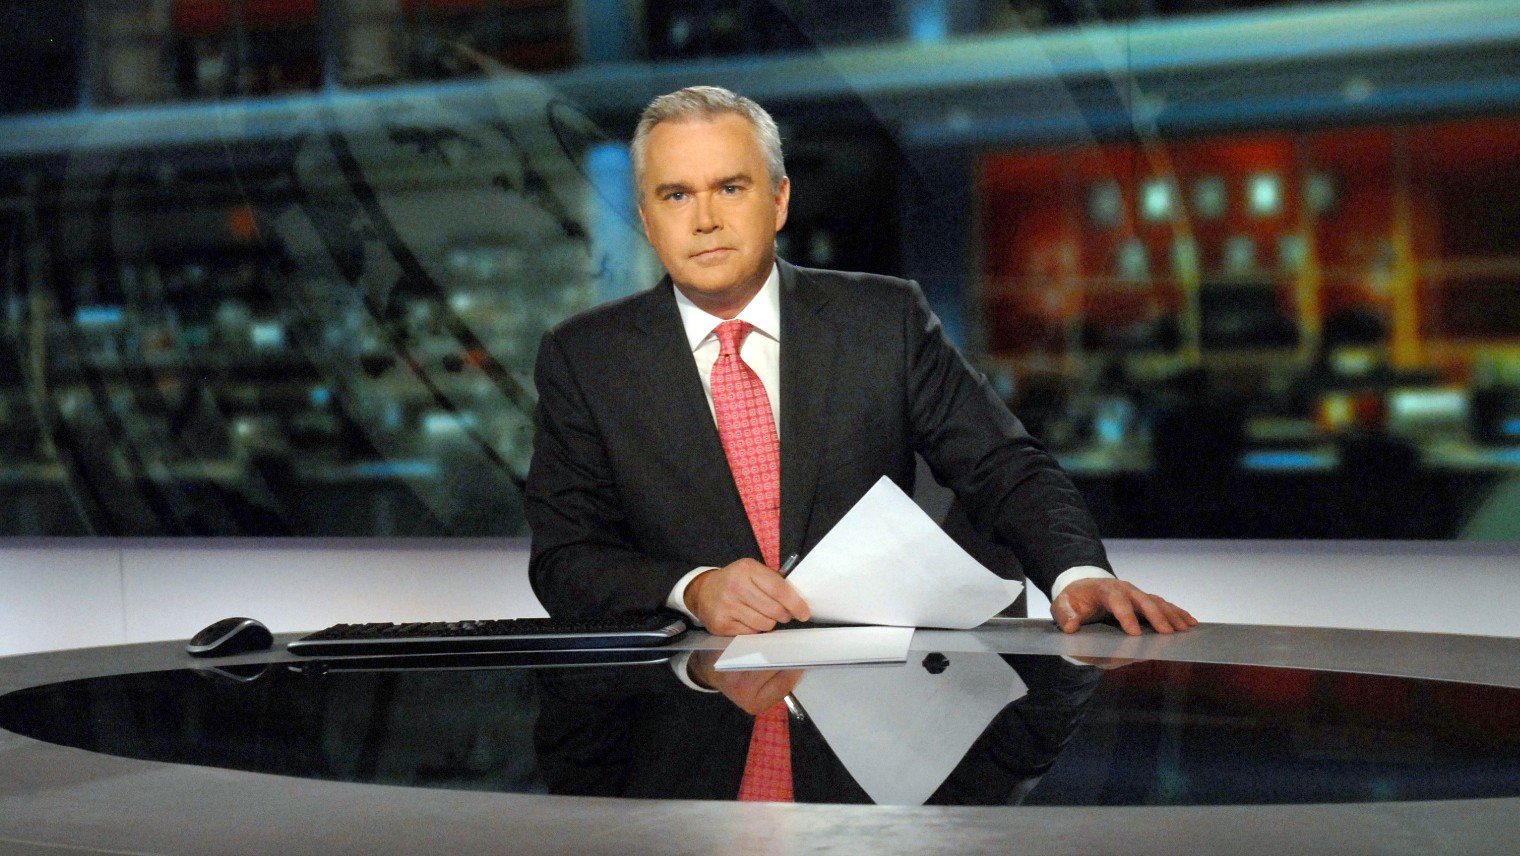 Huw Edwards named as presenter at centre of BBC crisis The Week photo